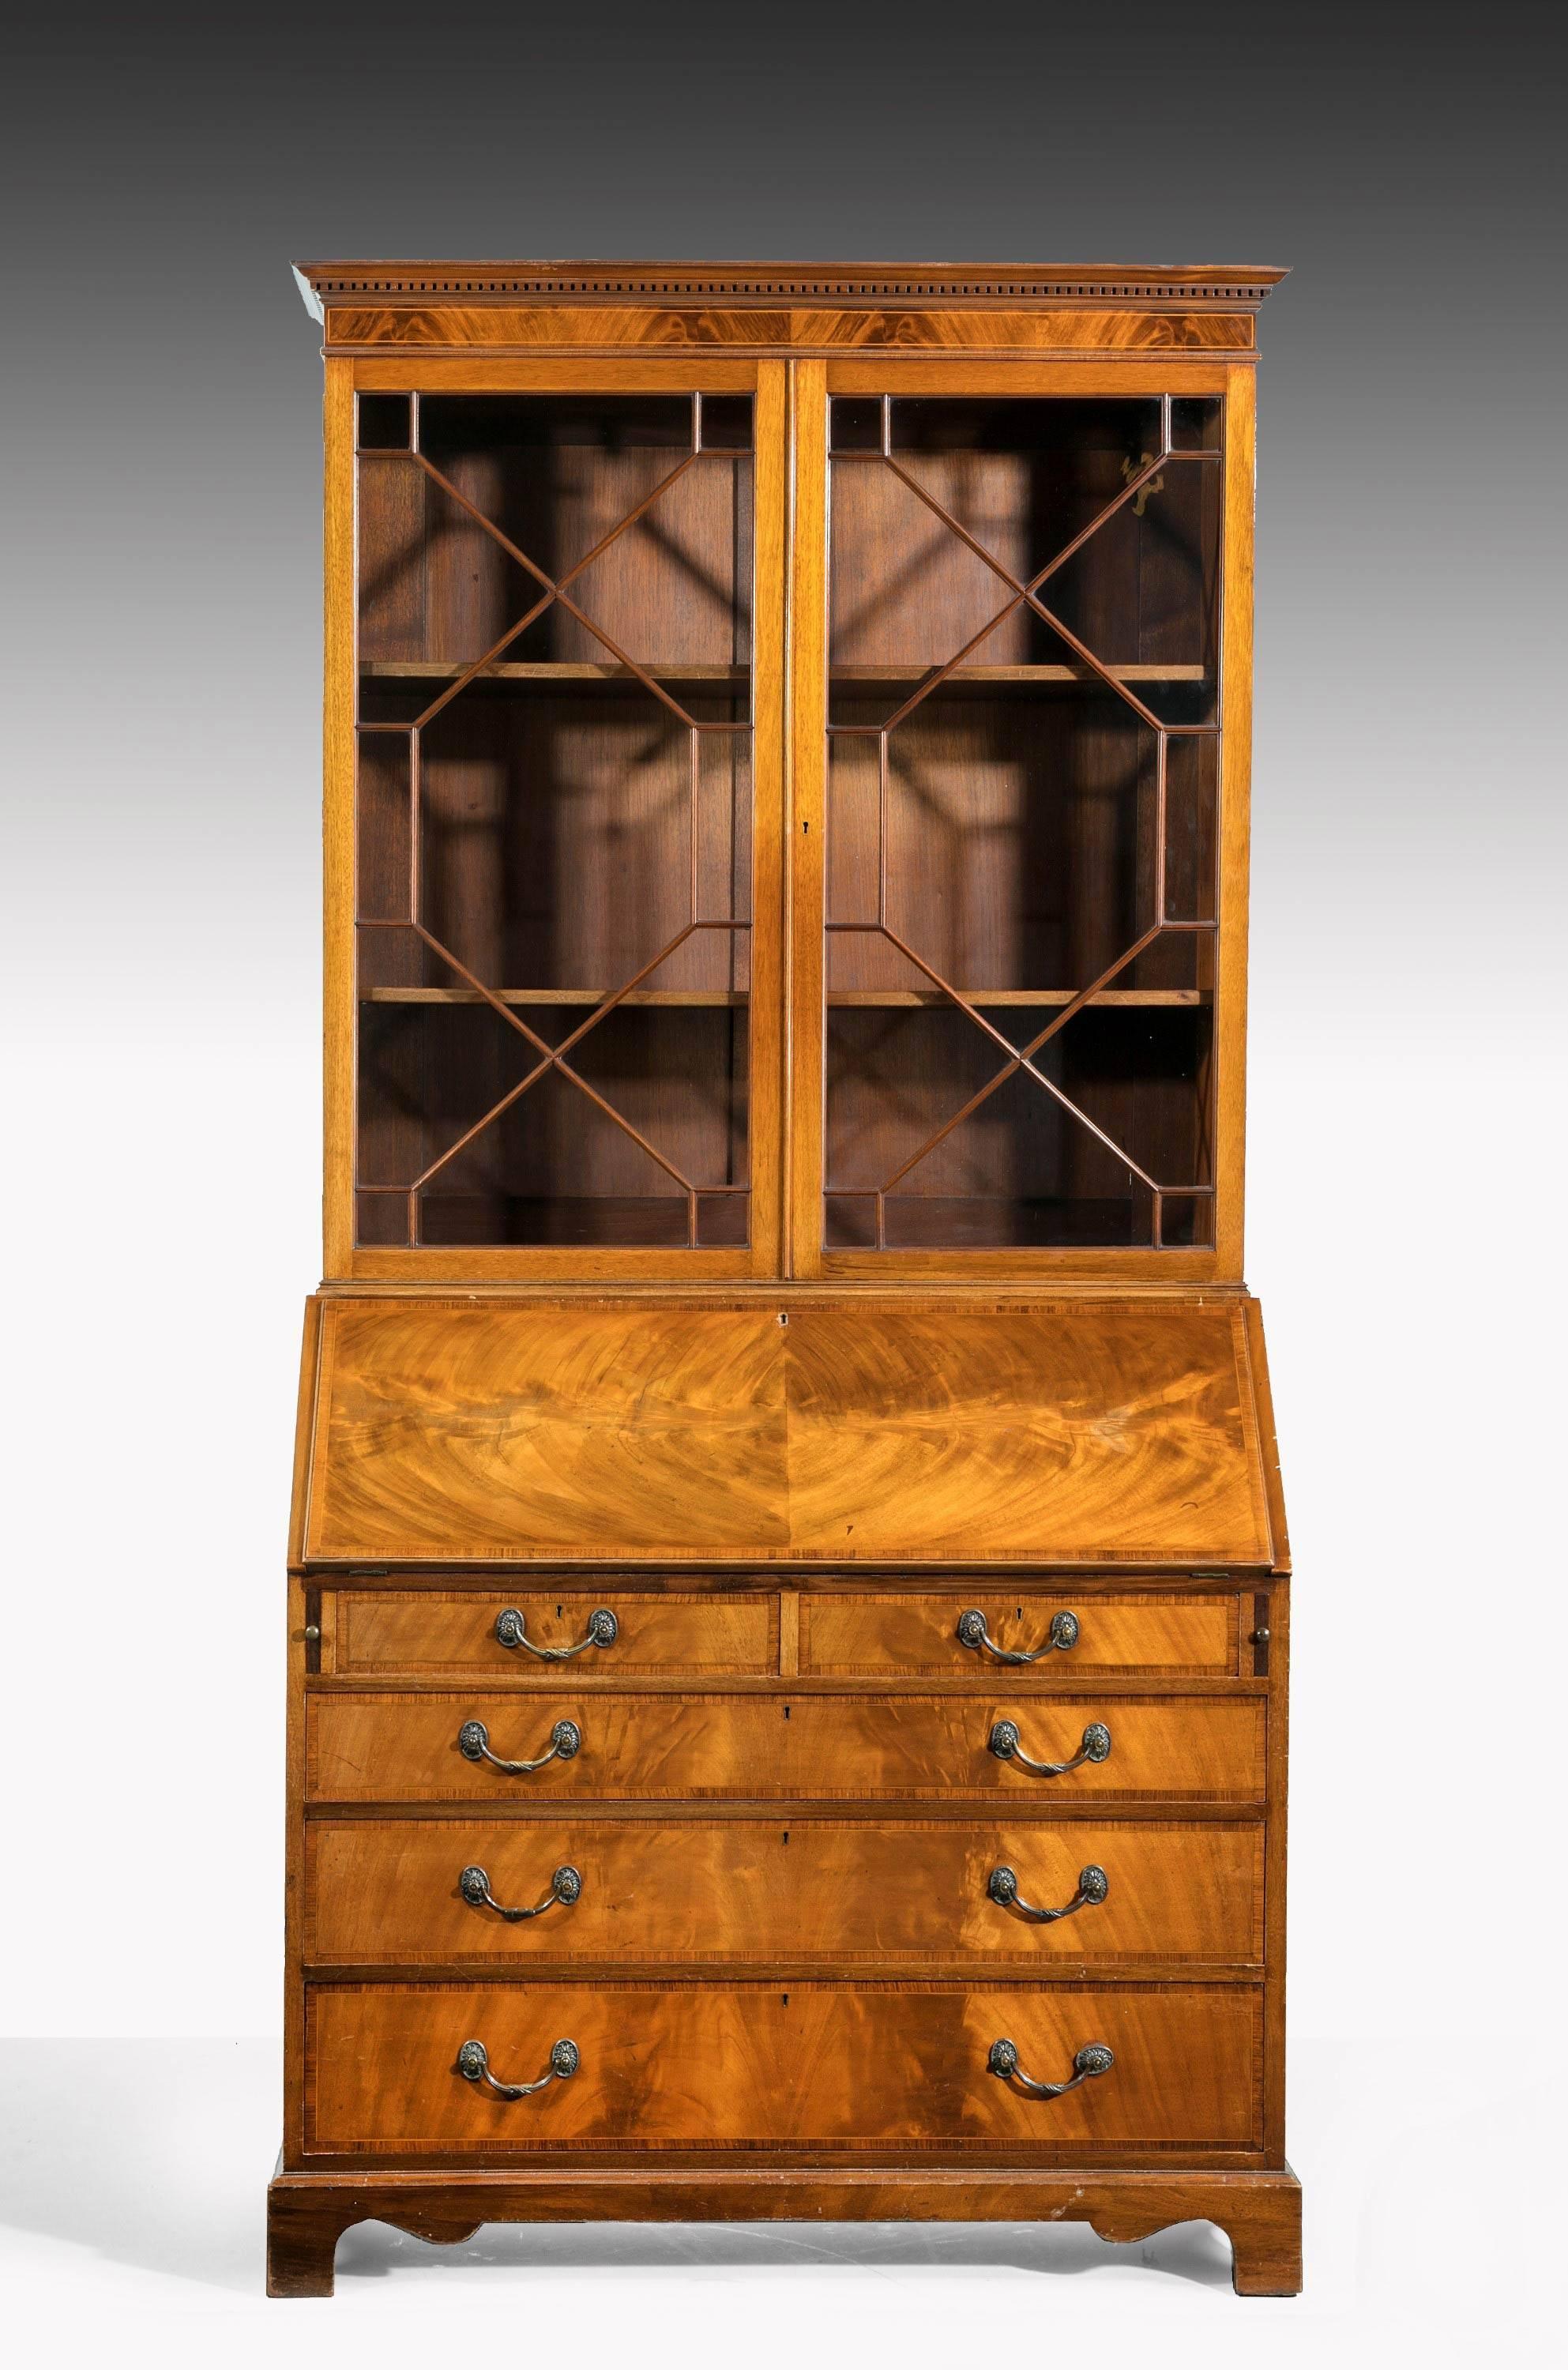 A George III period mahogany bureau bookcase with finely matched timbers throughout. Excellent overall condition. Astragal glazed top section. The interior with a fall front inset leather section incorporating pigeon holes and drawers.